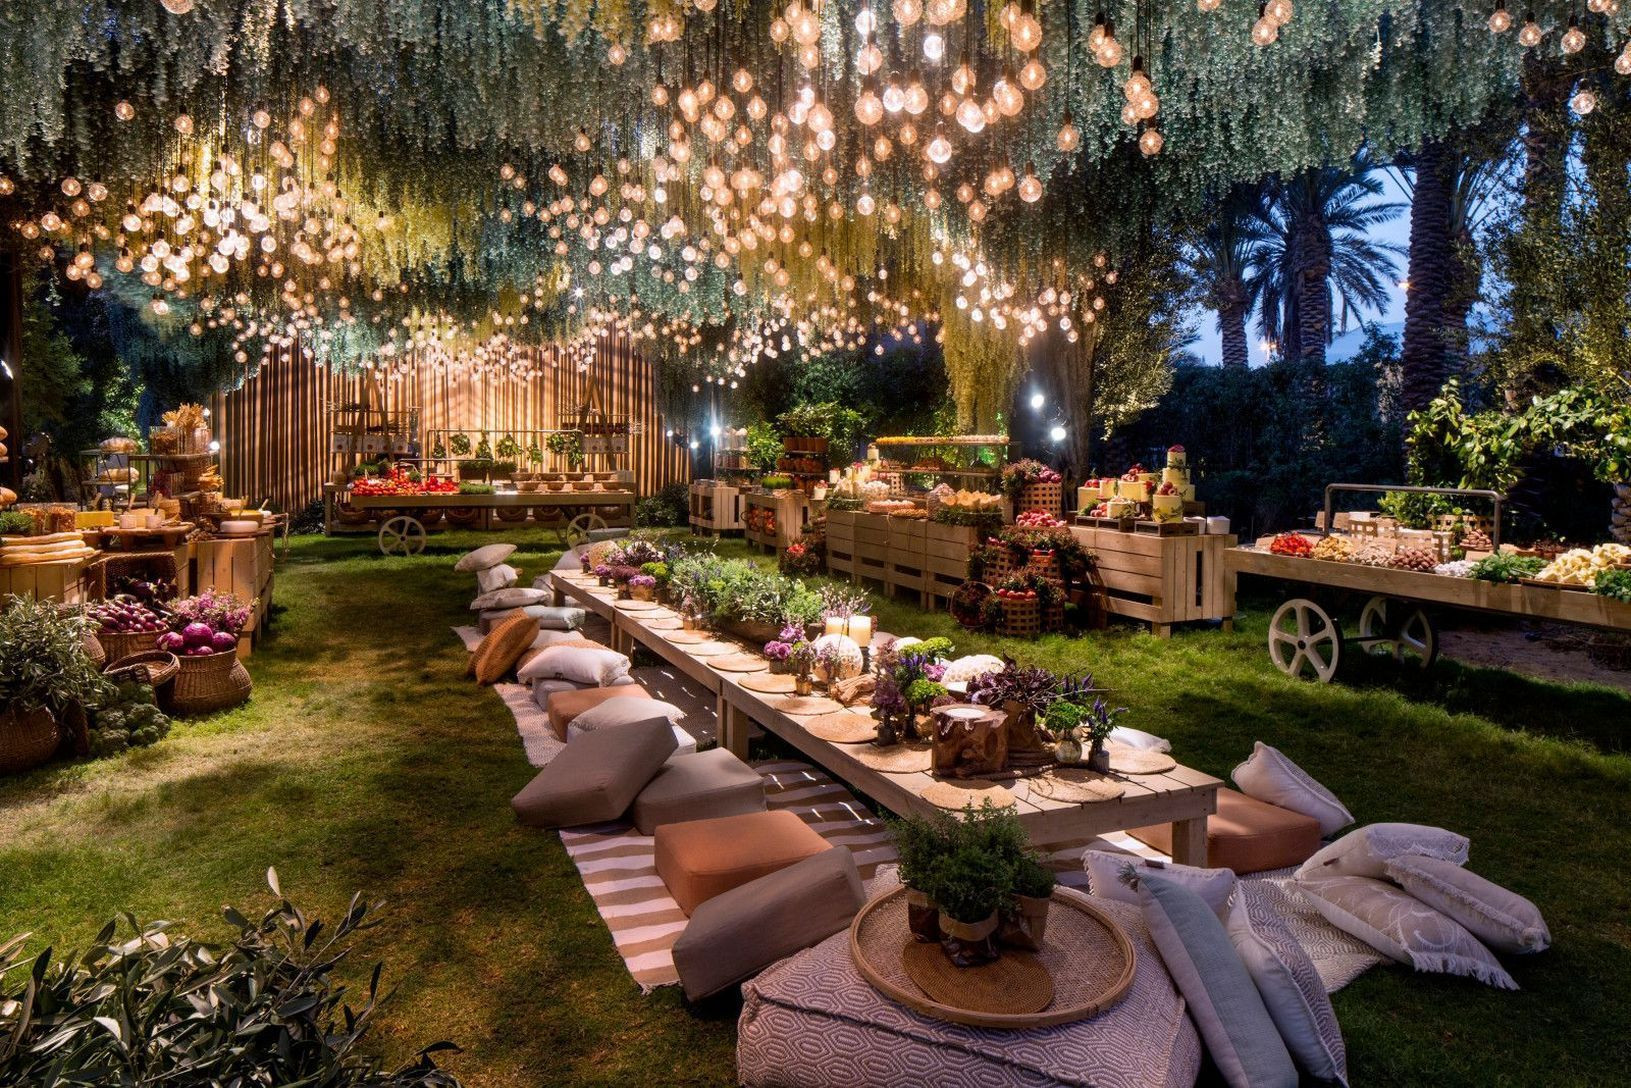 Outdoor Engagement Party Decoration Ideas
 Best Outdoor Easter Table Decorations